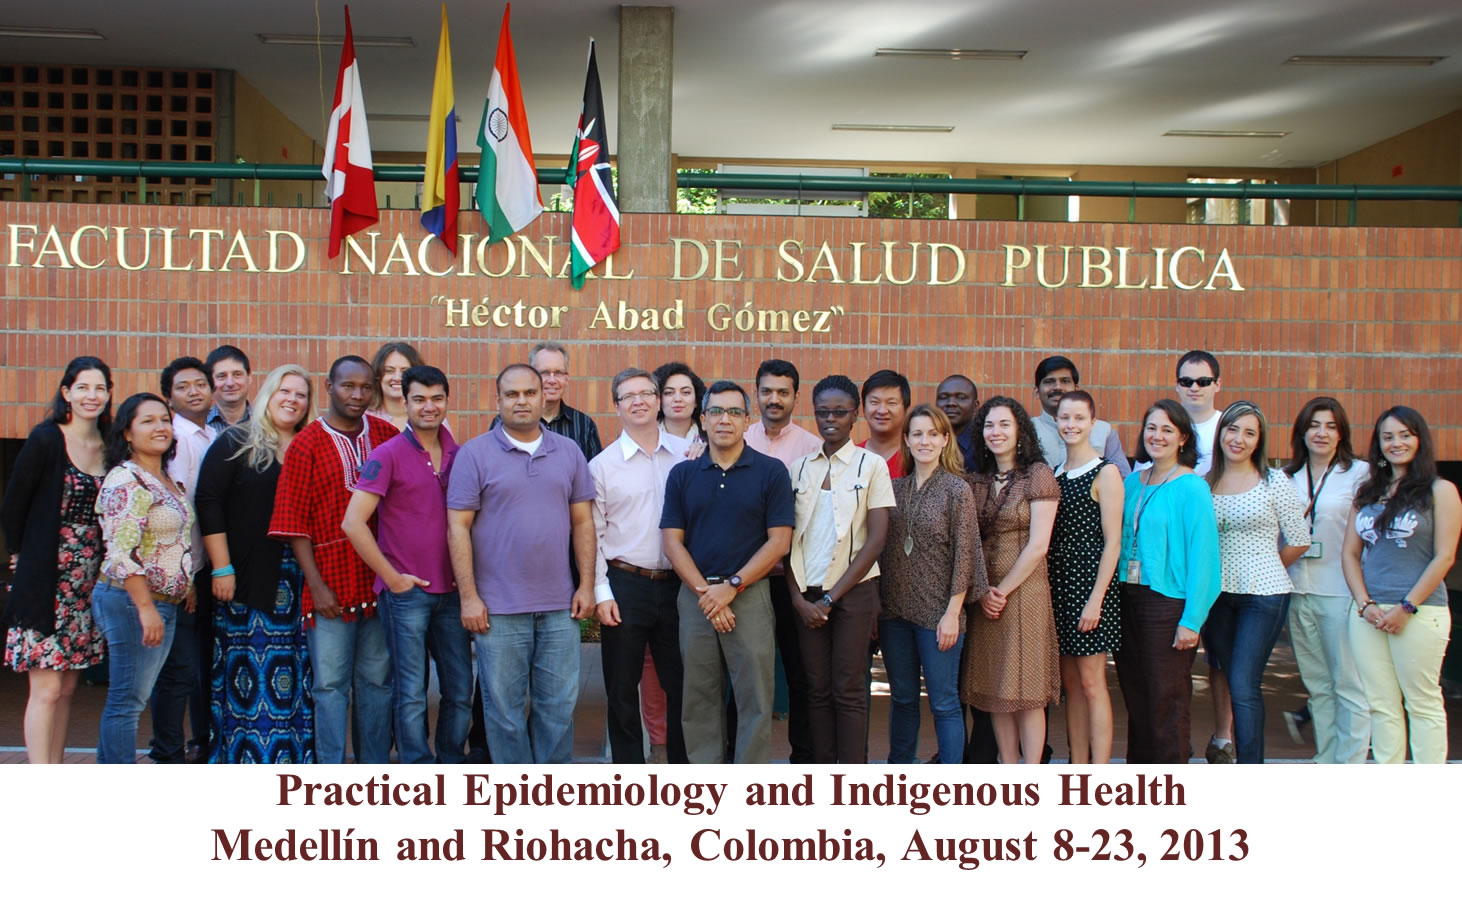 A group picture of all those attending the major course offering in Medellin, Colombia in August 2013.